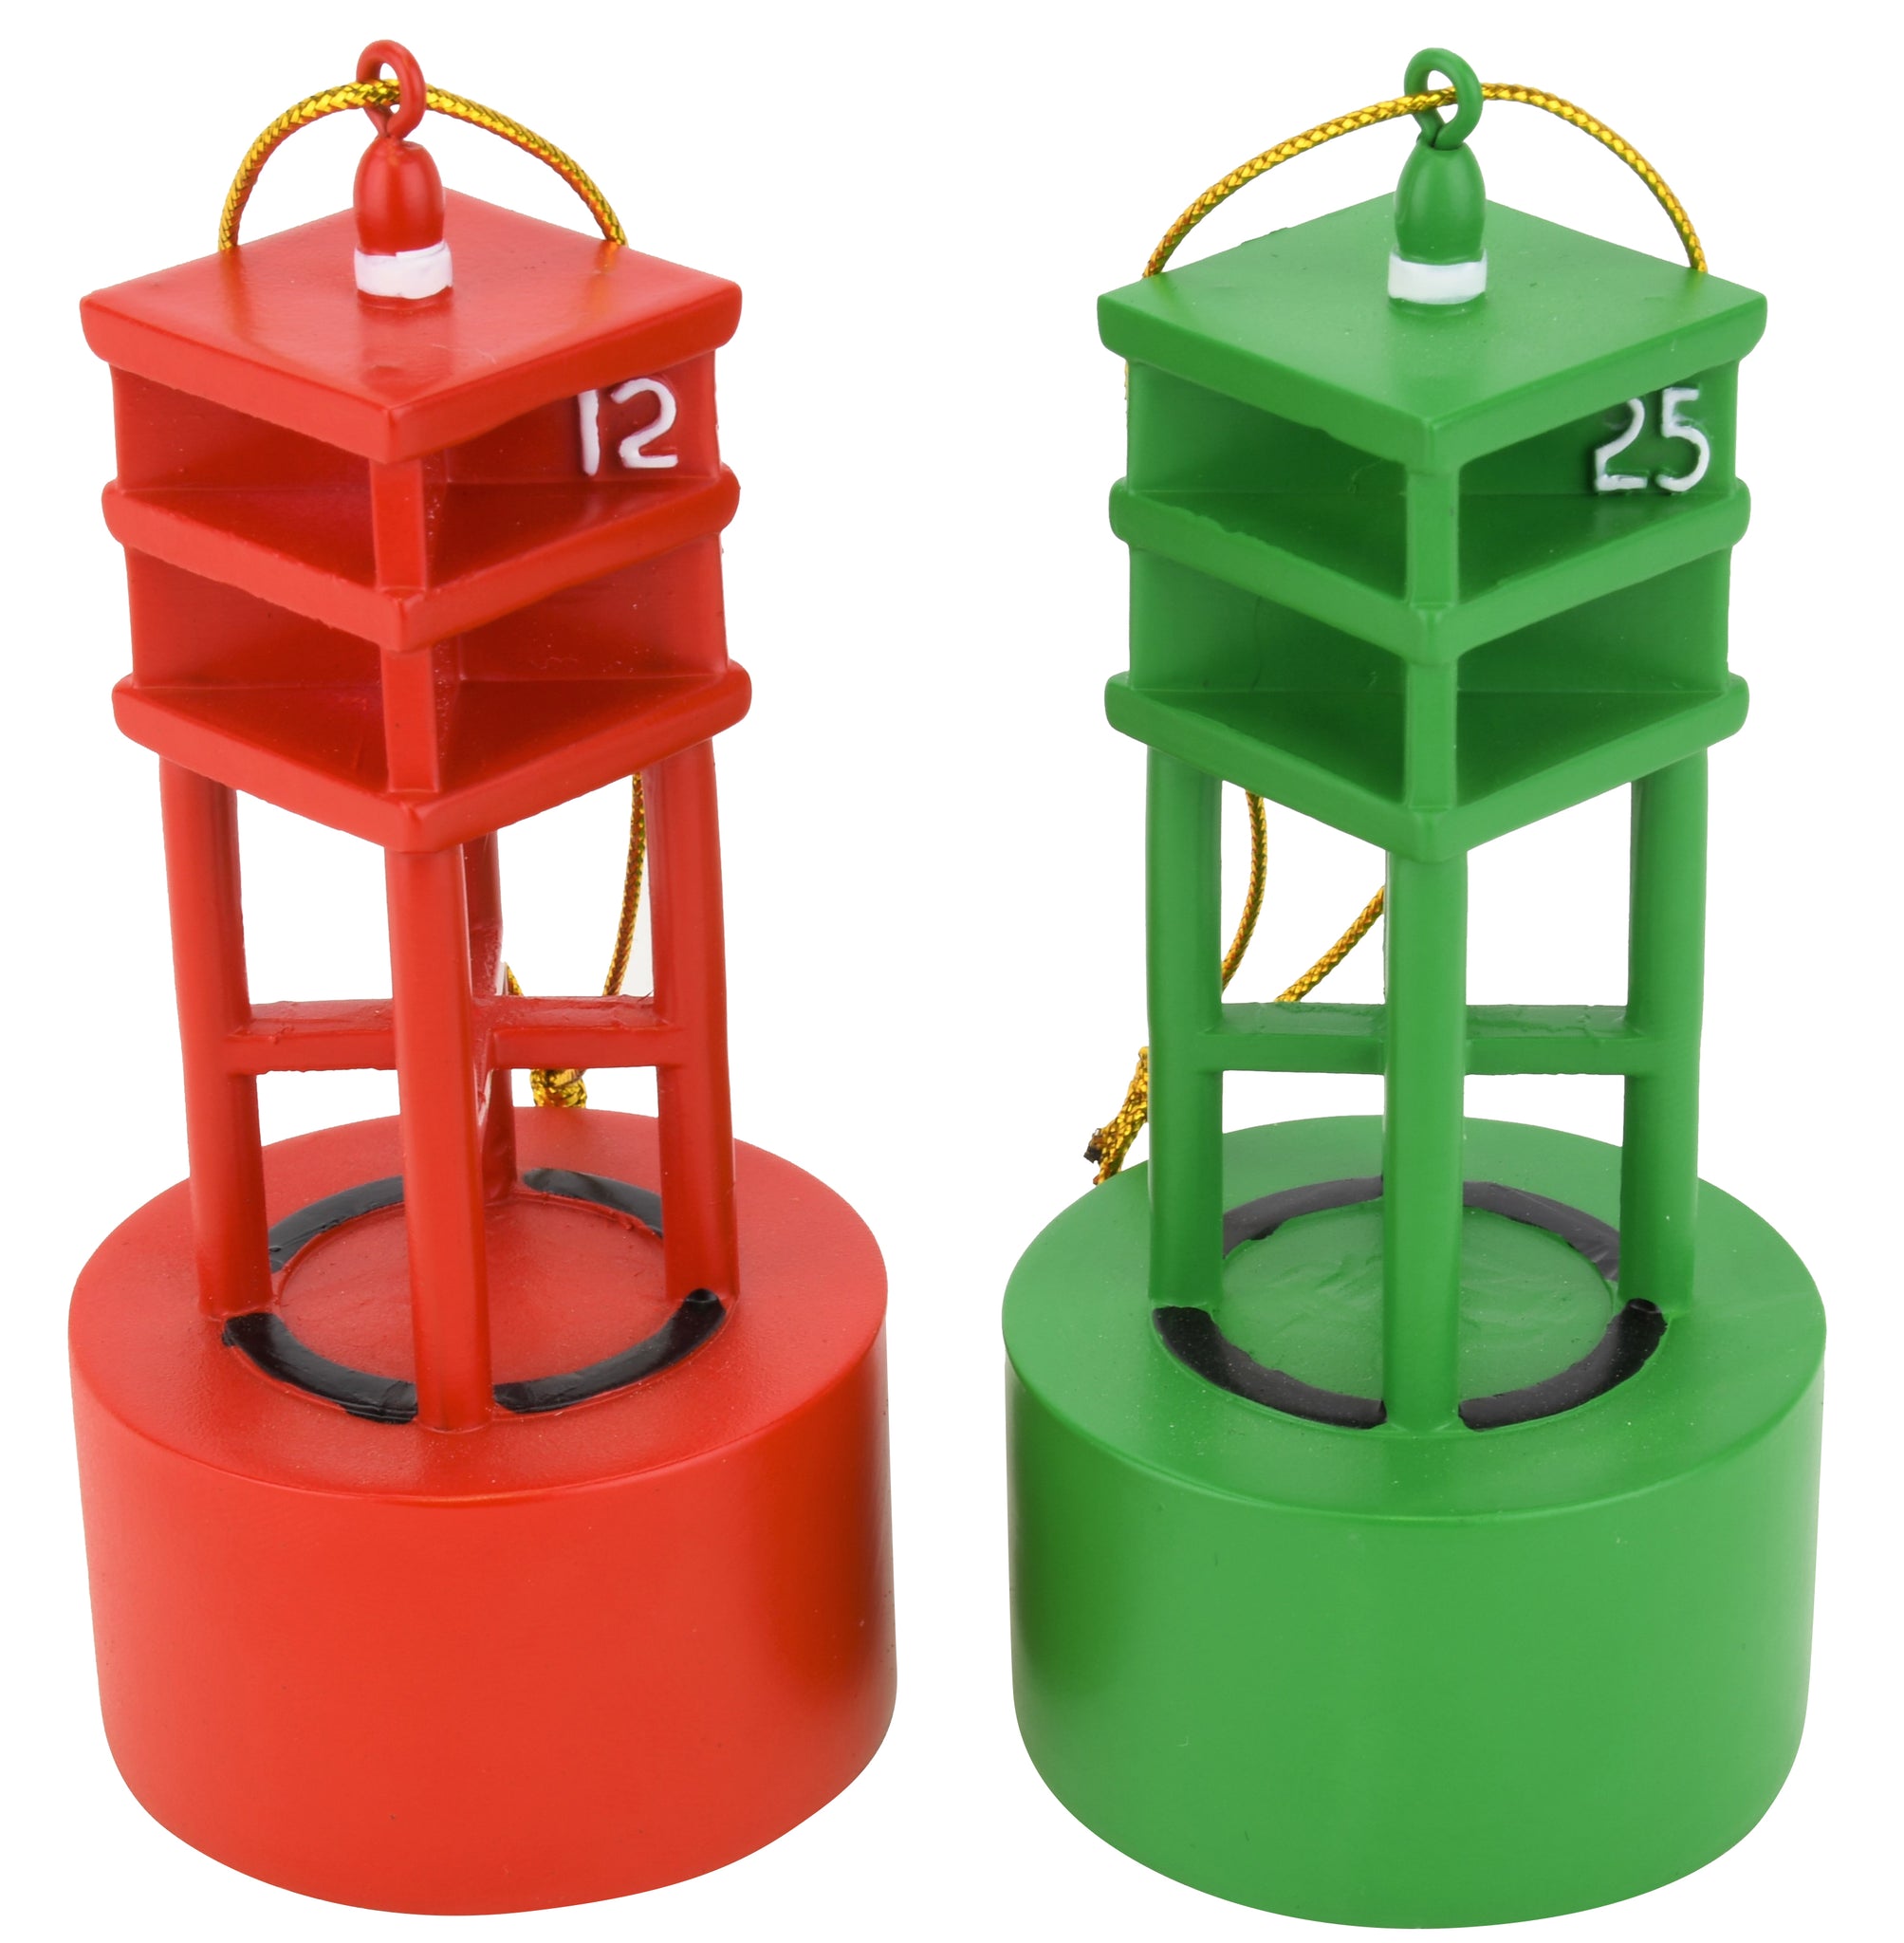 Set of 10 Vintage Style Buoys Table Number Markers